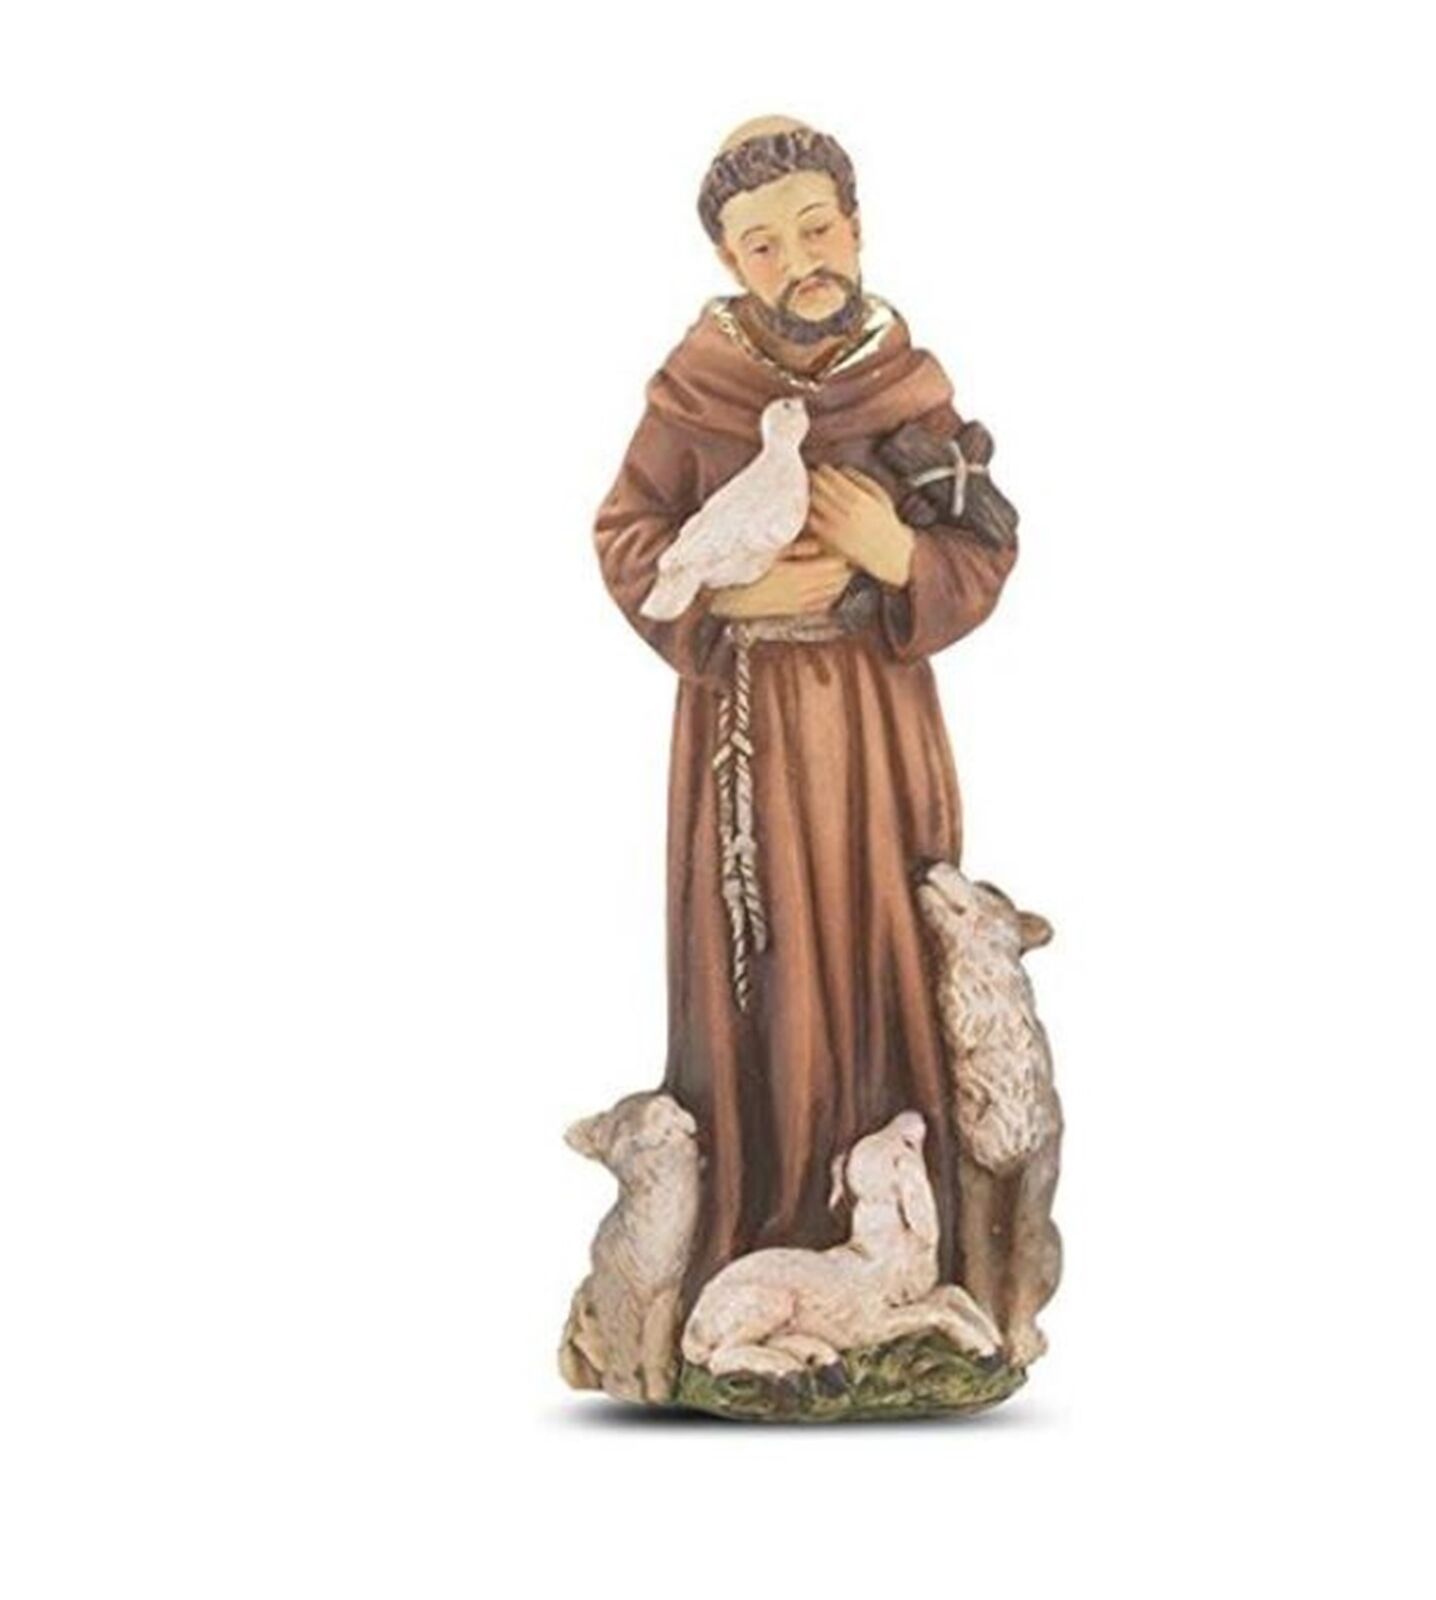 Statue St Francis of Assisi Catholic Figurine 4 Inch Patron Saint w Holy Card